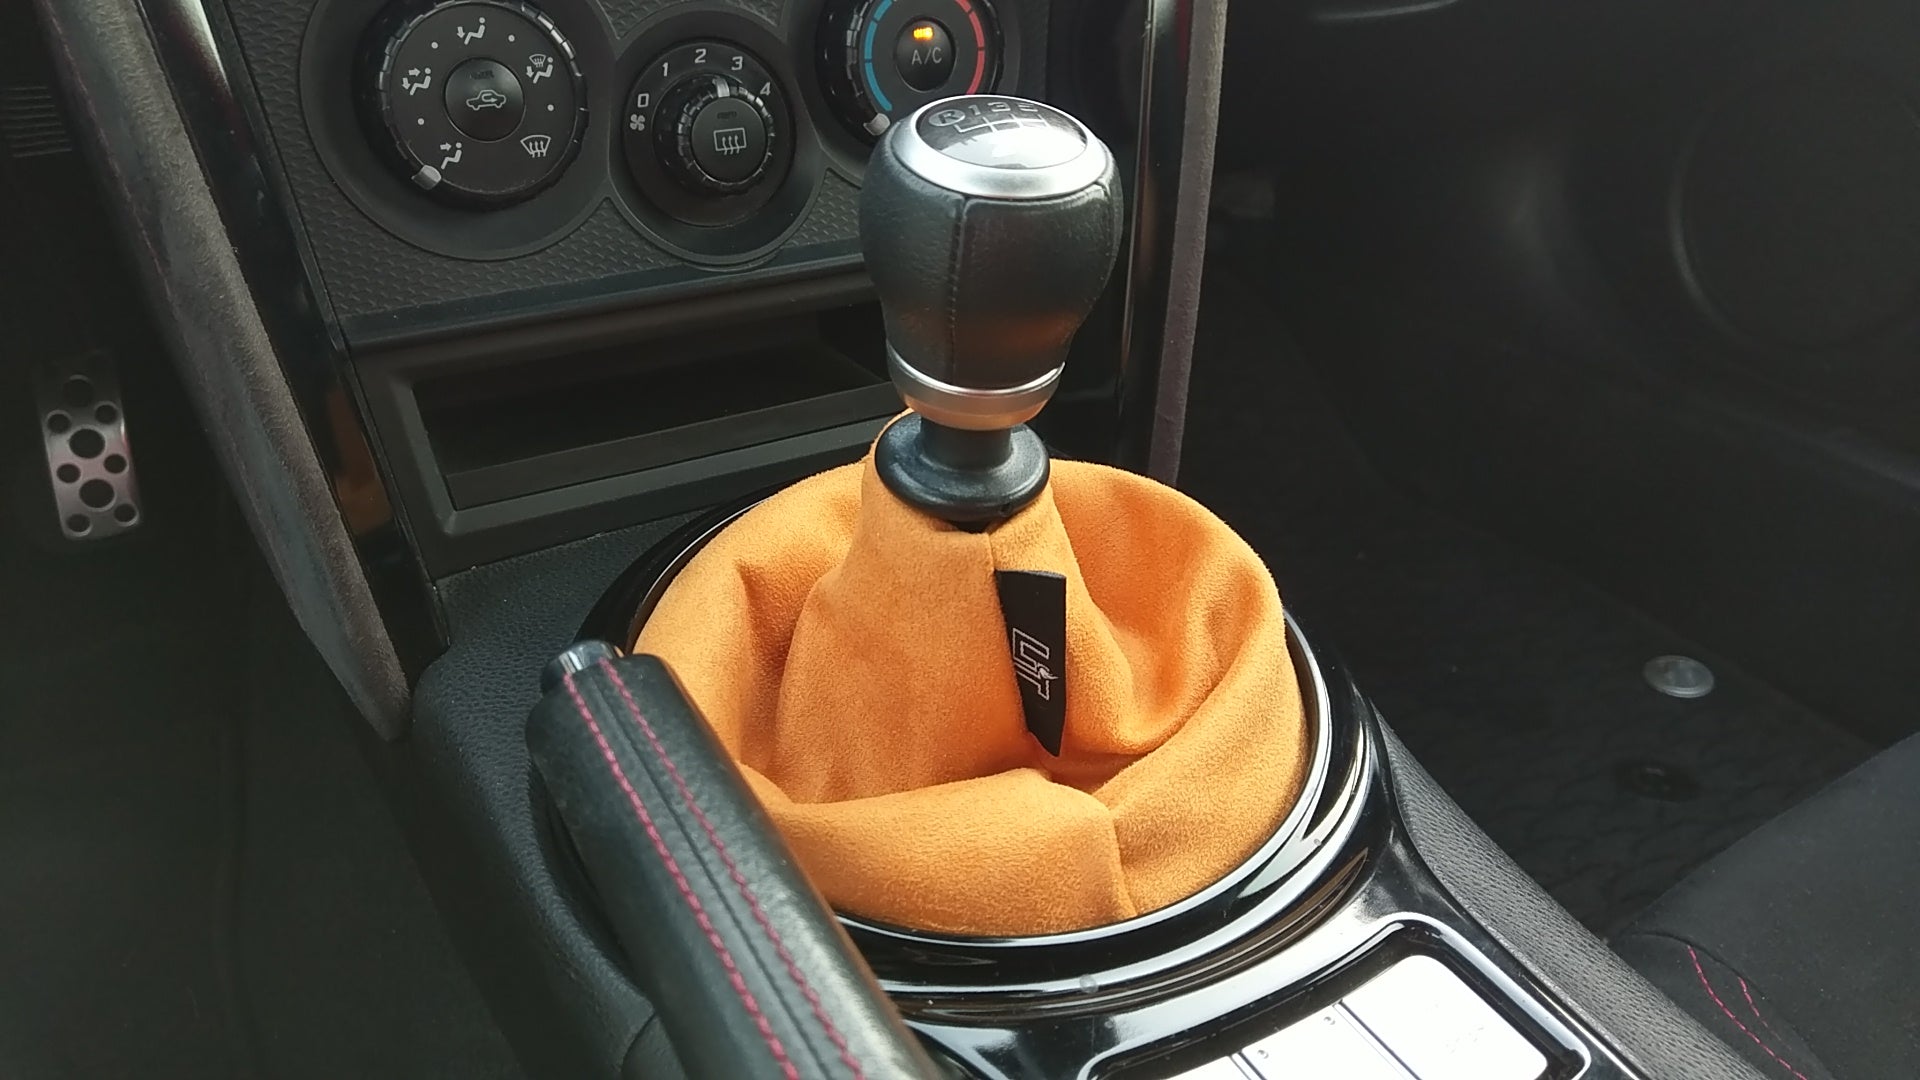 shift boot cover , shift boot cover for automatic , shift boot  wrx , shift boot cover gt86 , shift boot and ebrake boot , gear shift boot cover , jdm shift boot cover , gt86 shift boot , brz shift boot , sti shift boot , gtr shift boot , supra shift boot , silvia s13 shift boot , silvia s14 shift boot , 350z shift boot cover , 370z shift boot , shift boot retainer , shift boot ring , shift boot for cars , evo shift boot cover , dsg shift boot cover , universal shift boot cover , orange shift boot